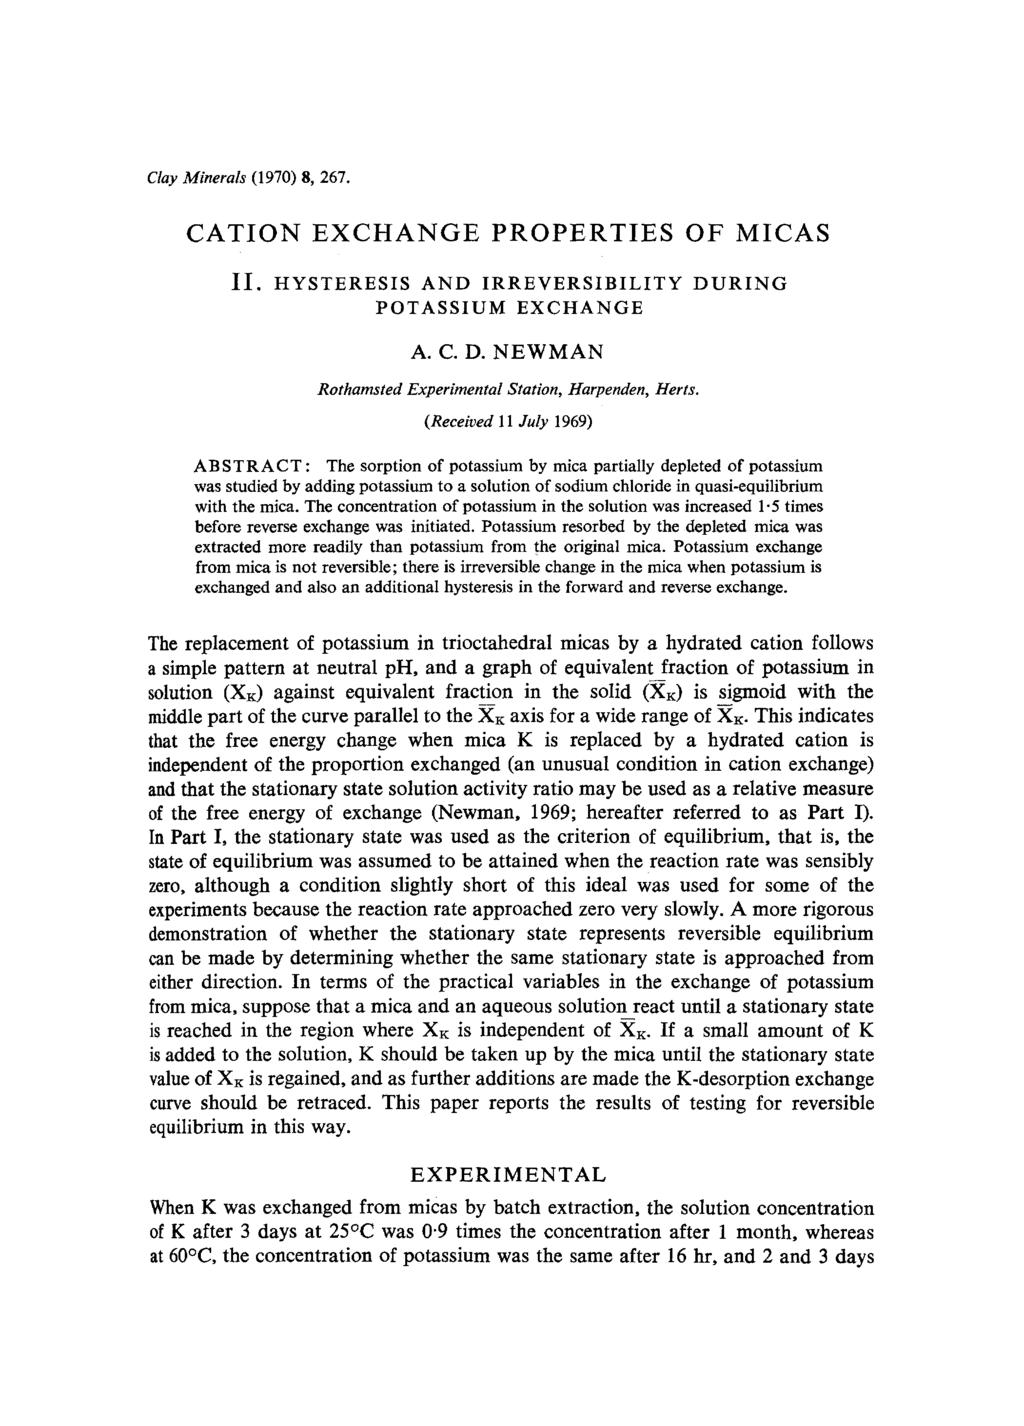 Clay Minerals (1970) 8, 267. CATION EXCHANGE PROPERTIES OF MICAS II. HYSTERESIS AND IRREVERSIBILITY POTASSIUM EXCHANGE DURING A. C. D. NEWMAN Rothamsted Experimental Station, Harpenden, Herts.